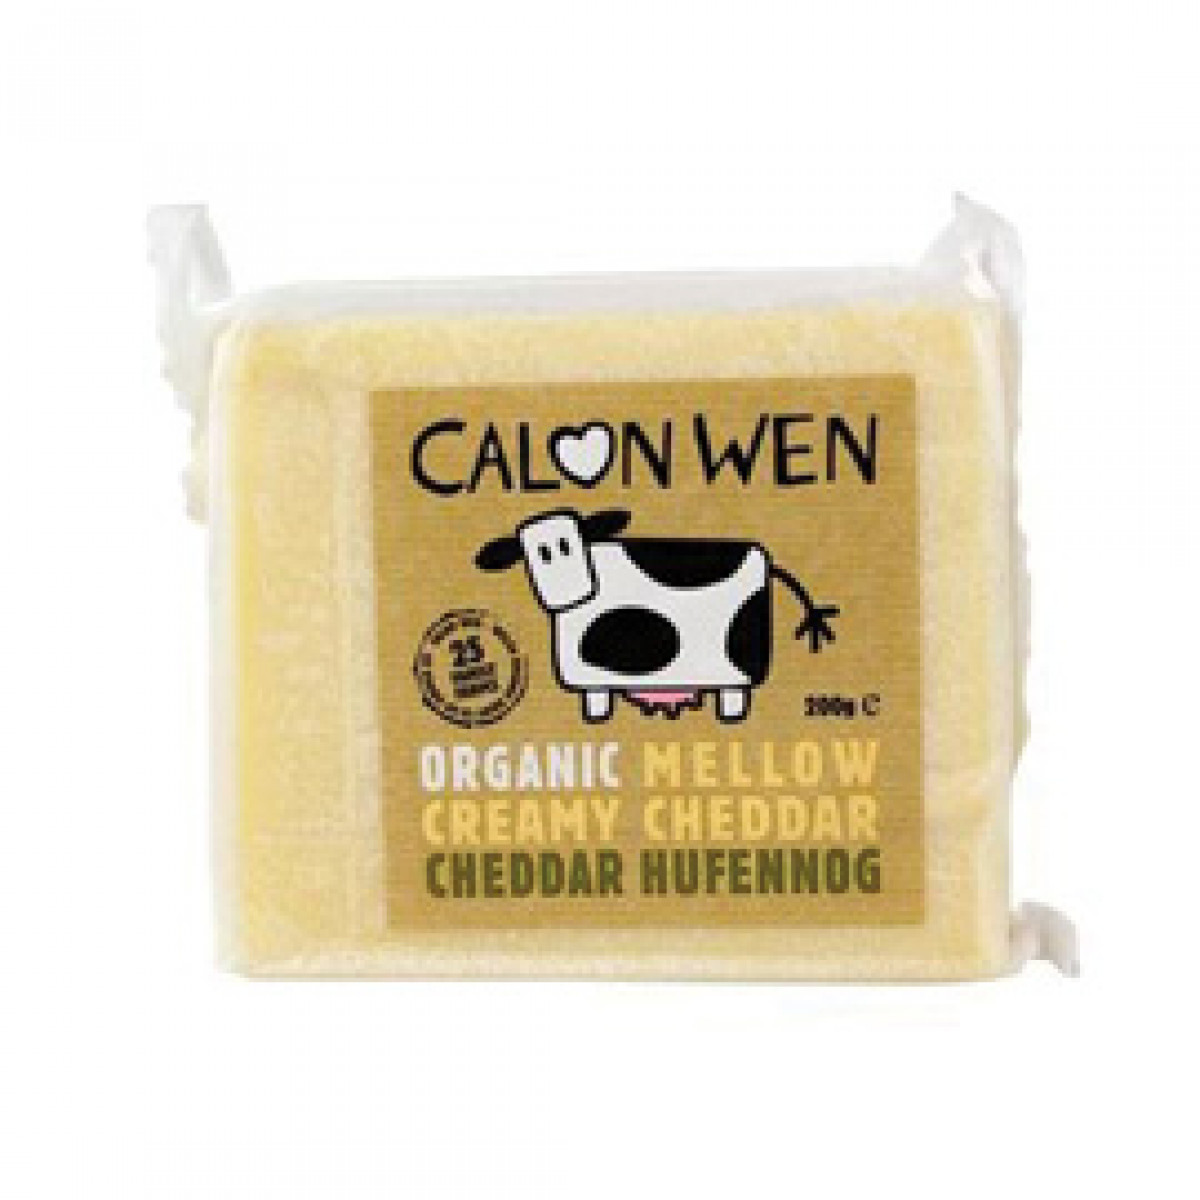 Product picture for Mellow Creamy Cheddar Cheese